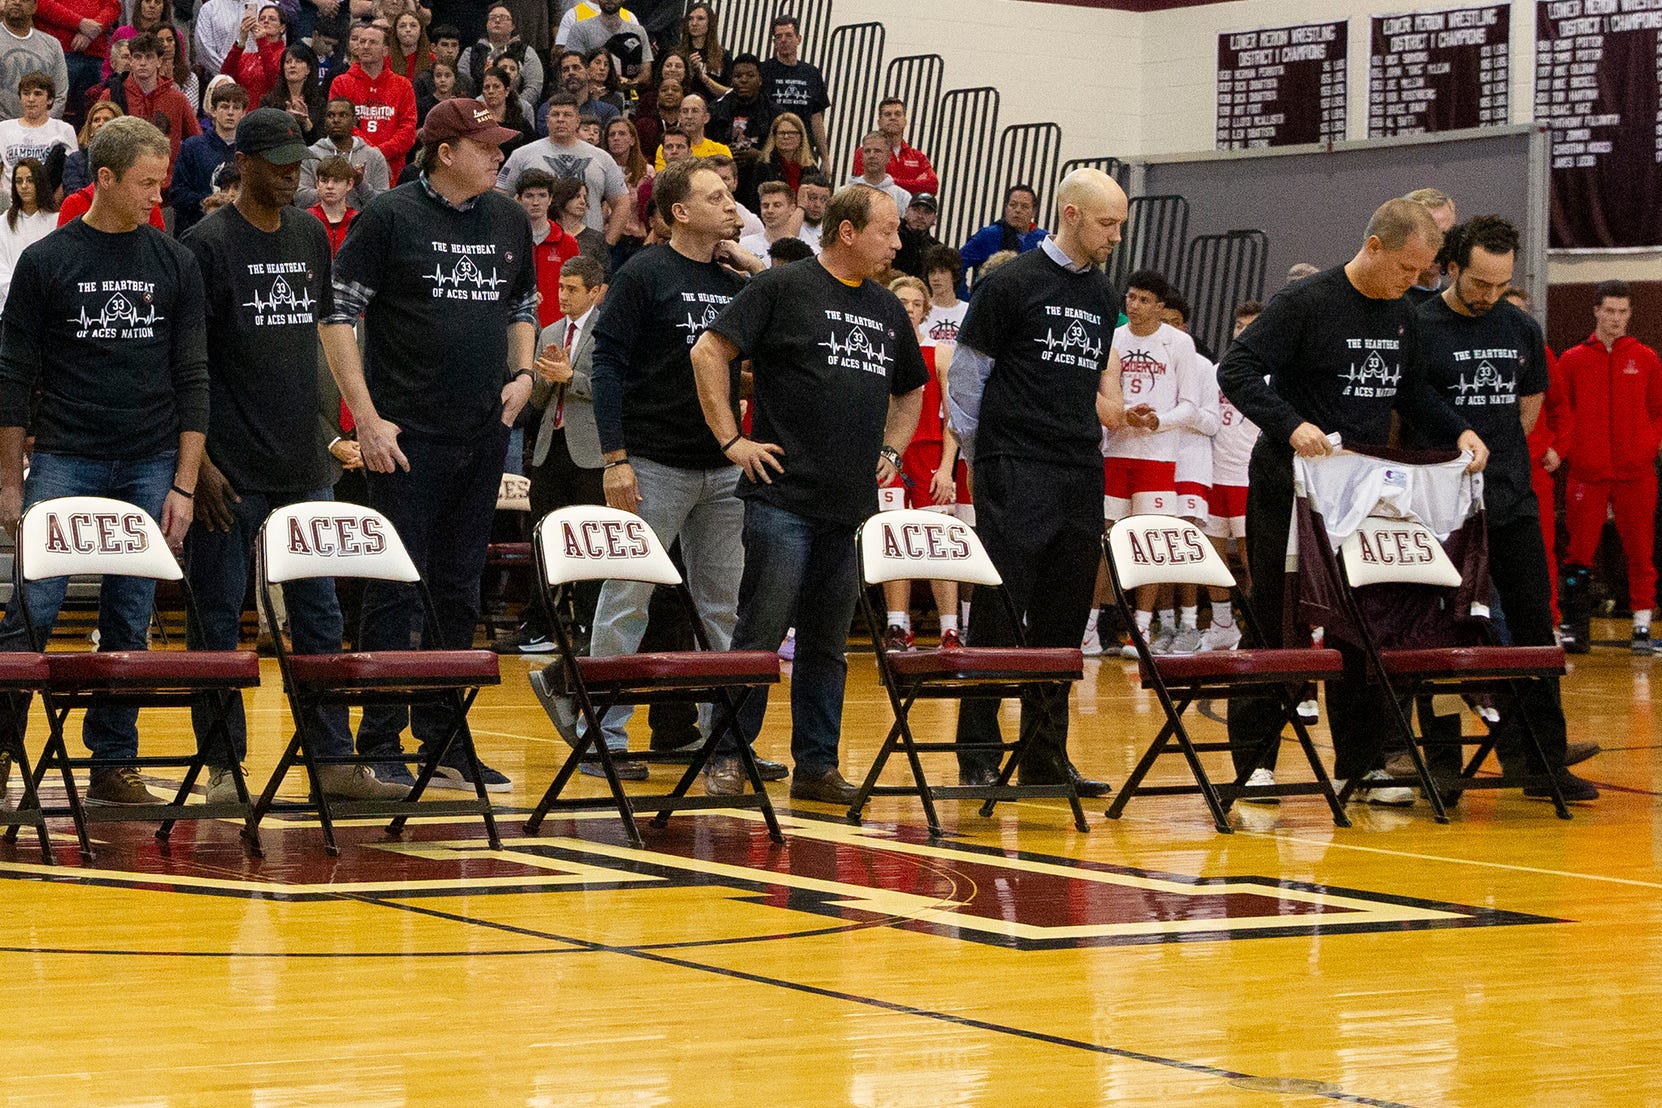 Lower Merion High basketball alumni place nine empty chairs on the court to symbolize the nine victims of the helicopter crash that included Kobe Bryant.